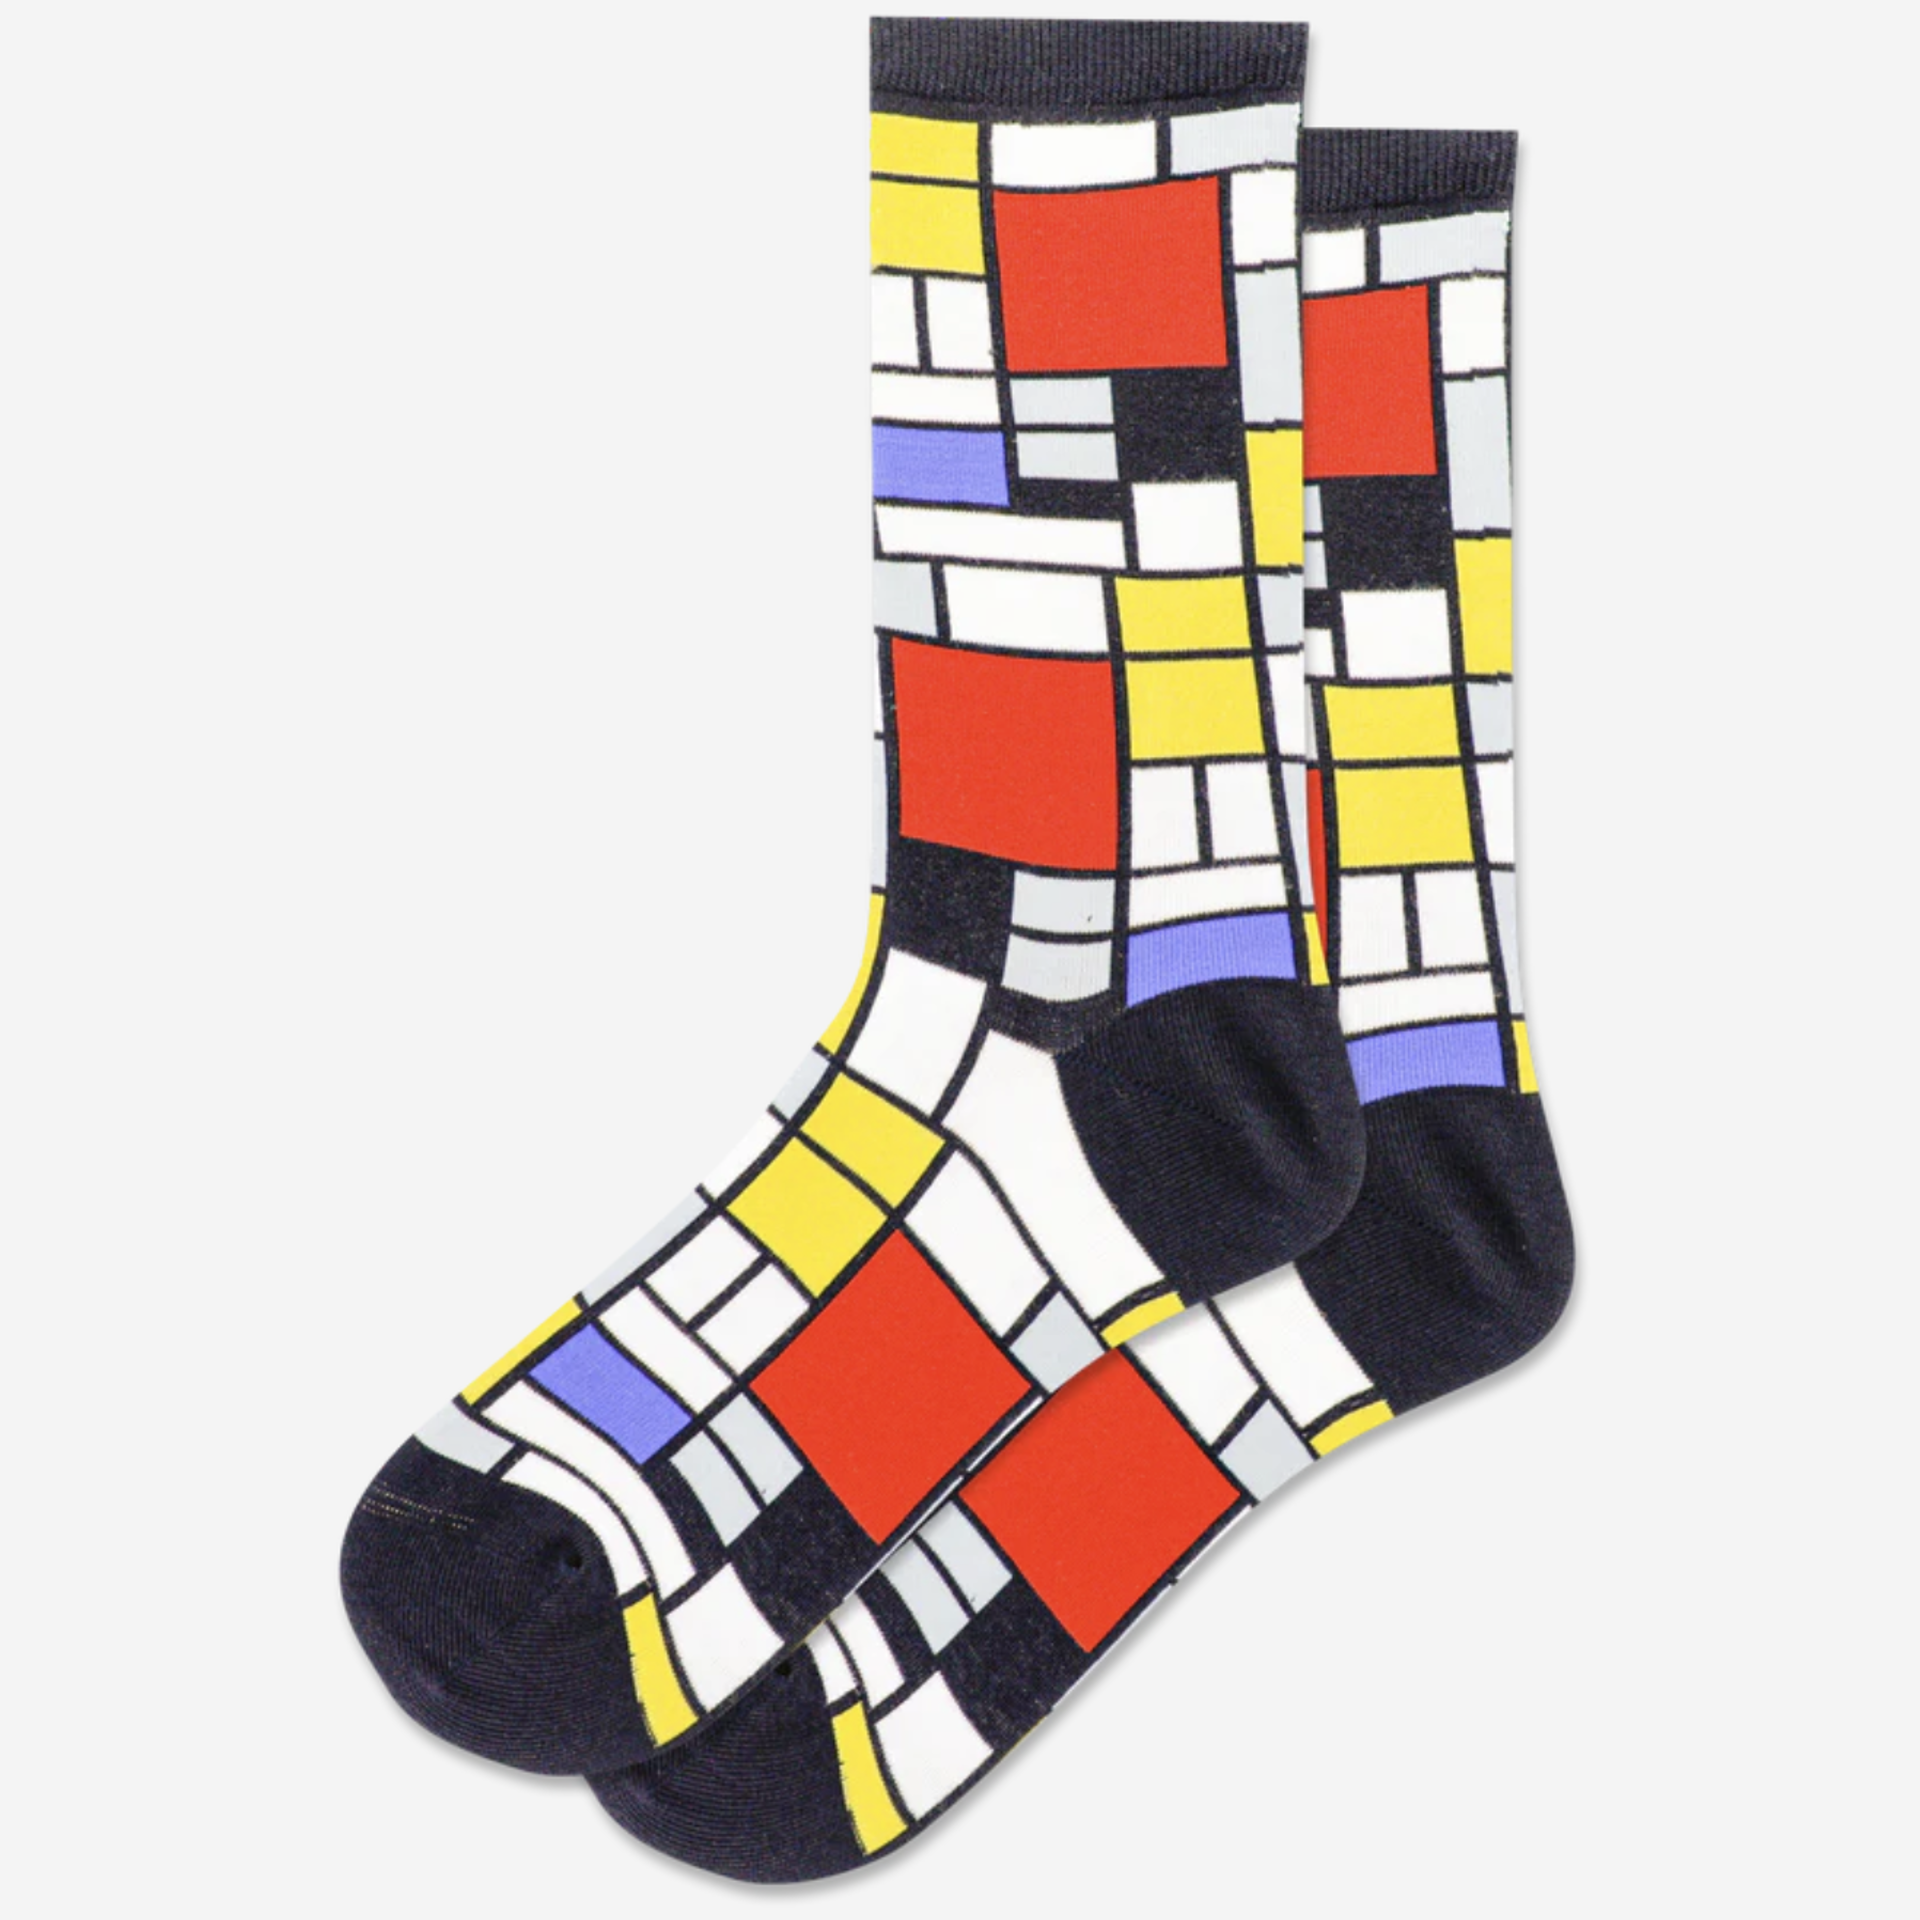 HOTSOX - Composition with Red, Yellow, Black Crew Sock by Chauvet Arts